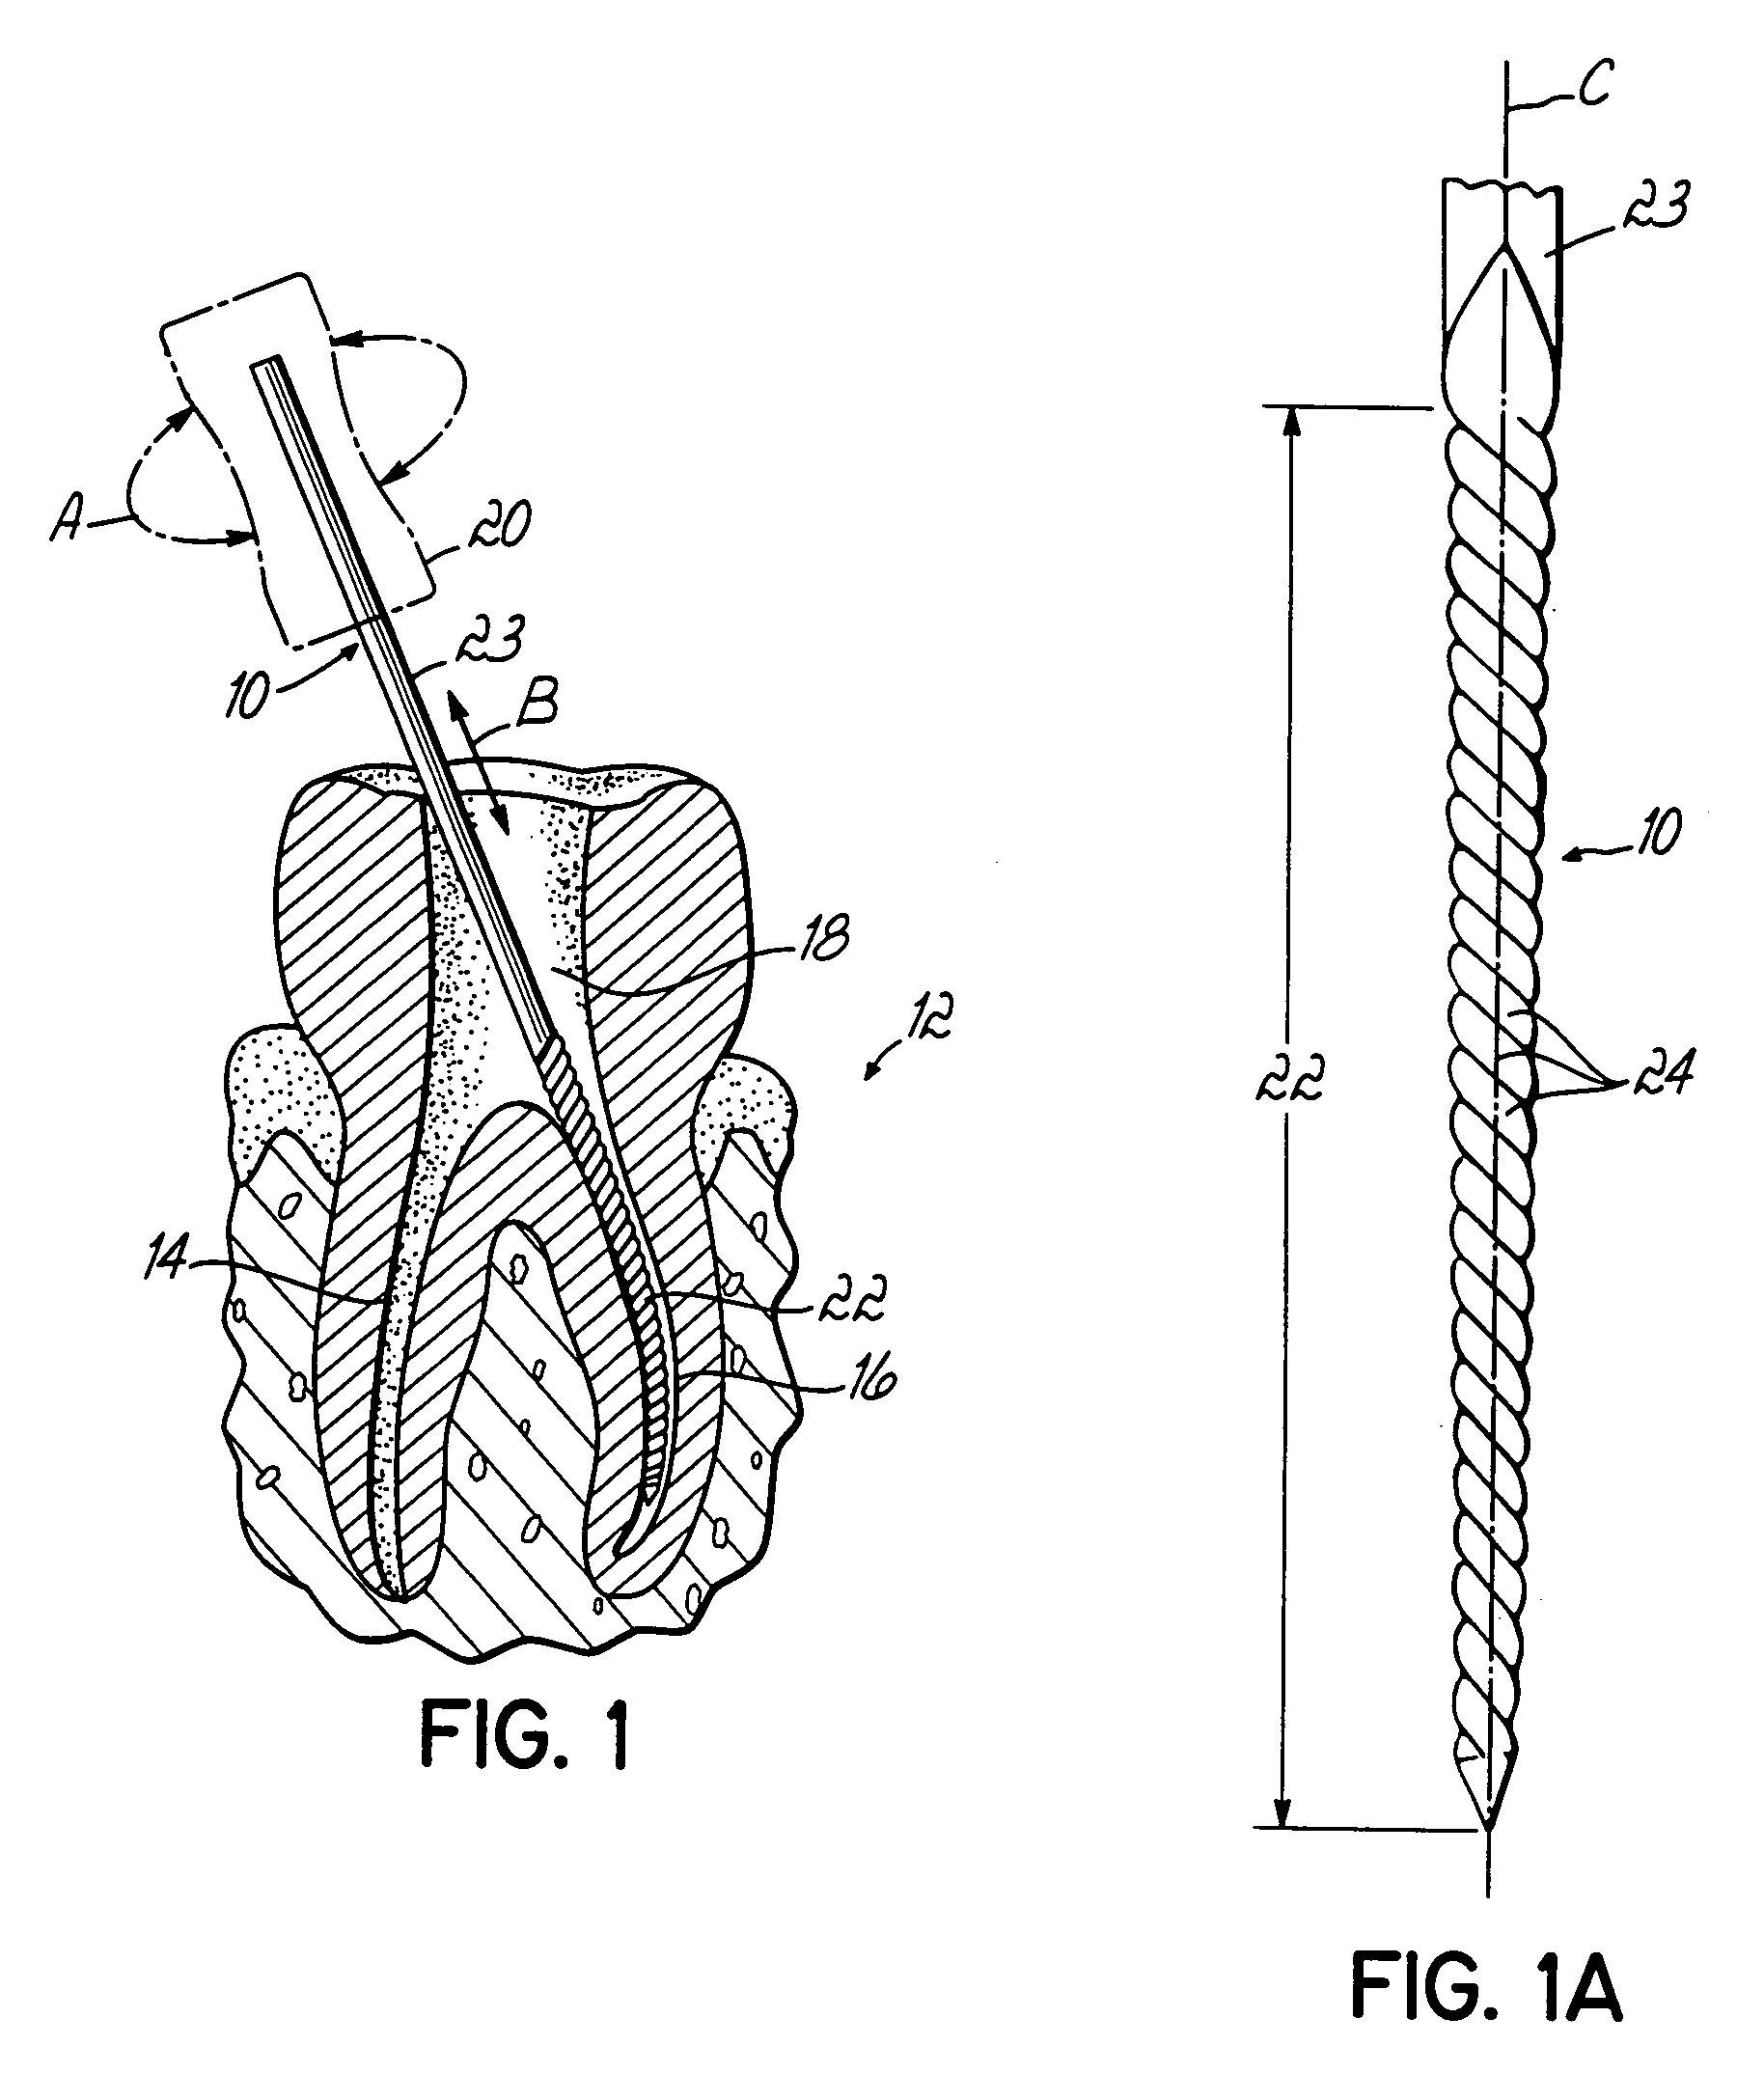 Method of manufacturing an endodontic instrument